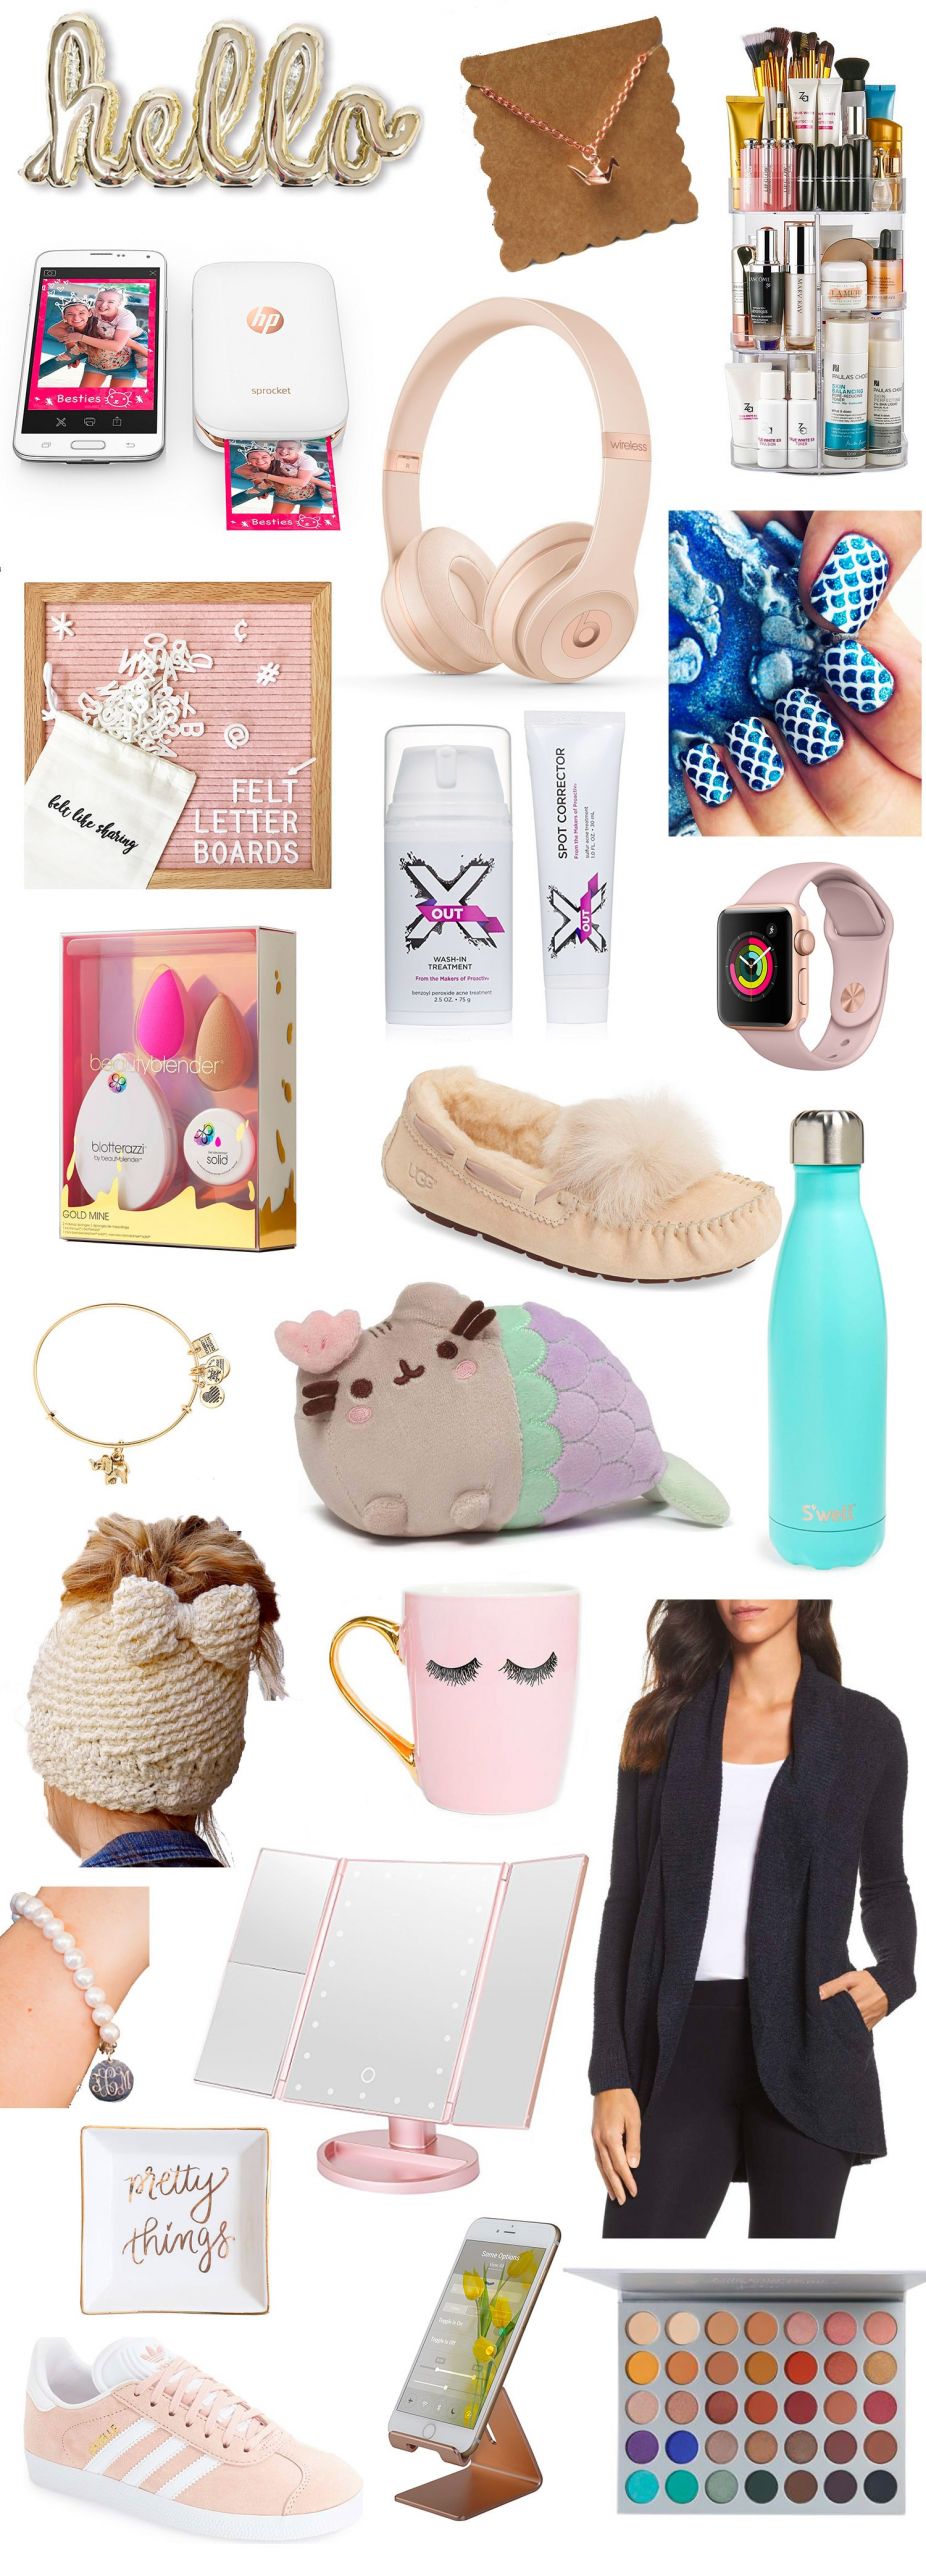 Teenage Girlfriend Gift Ideas
 Top Gifts for Teens This Christmas